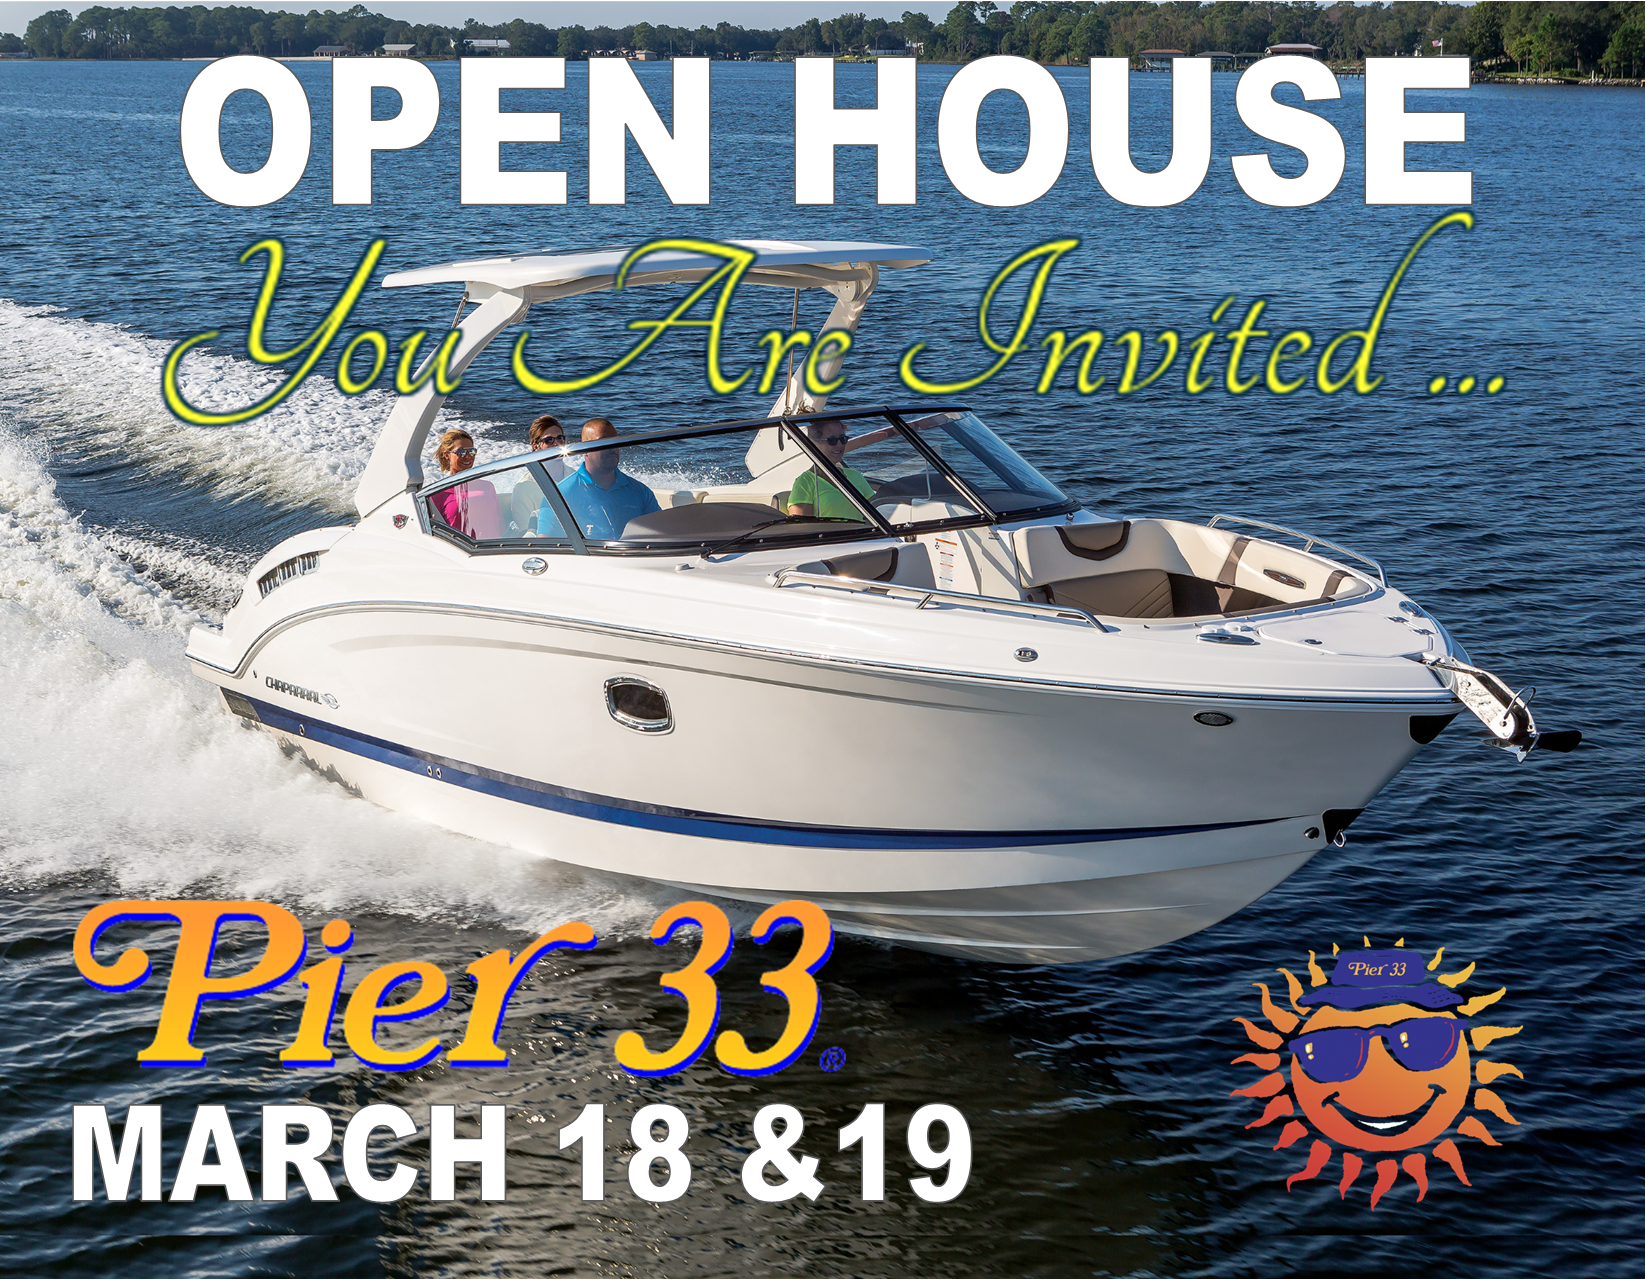 You Are Invited to the Pier 33 Open House, March 18 & 19